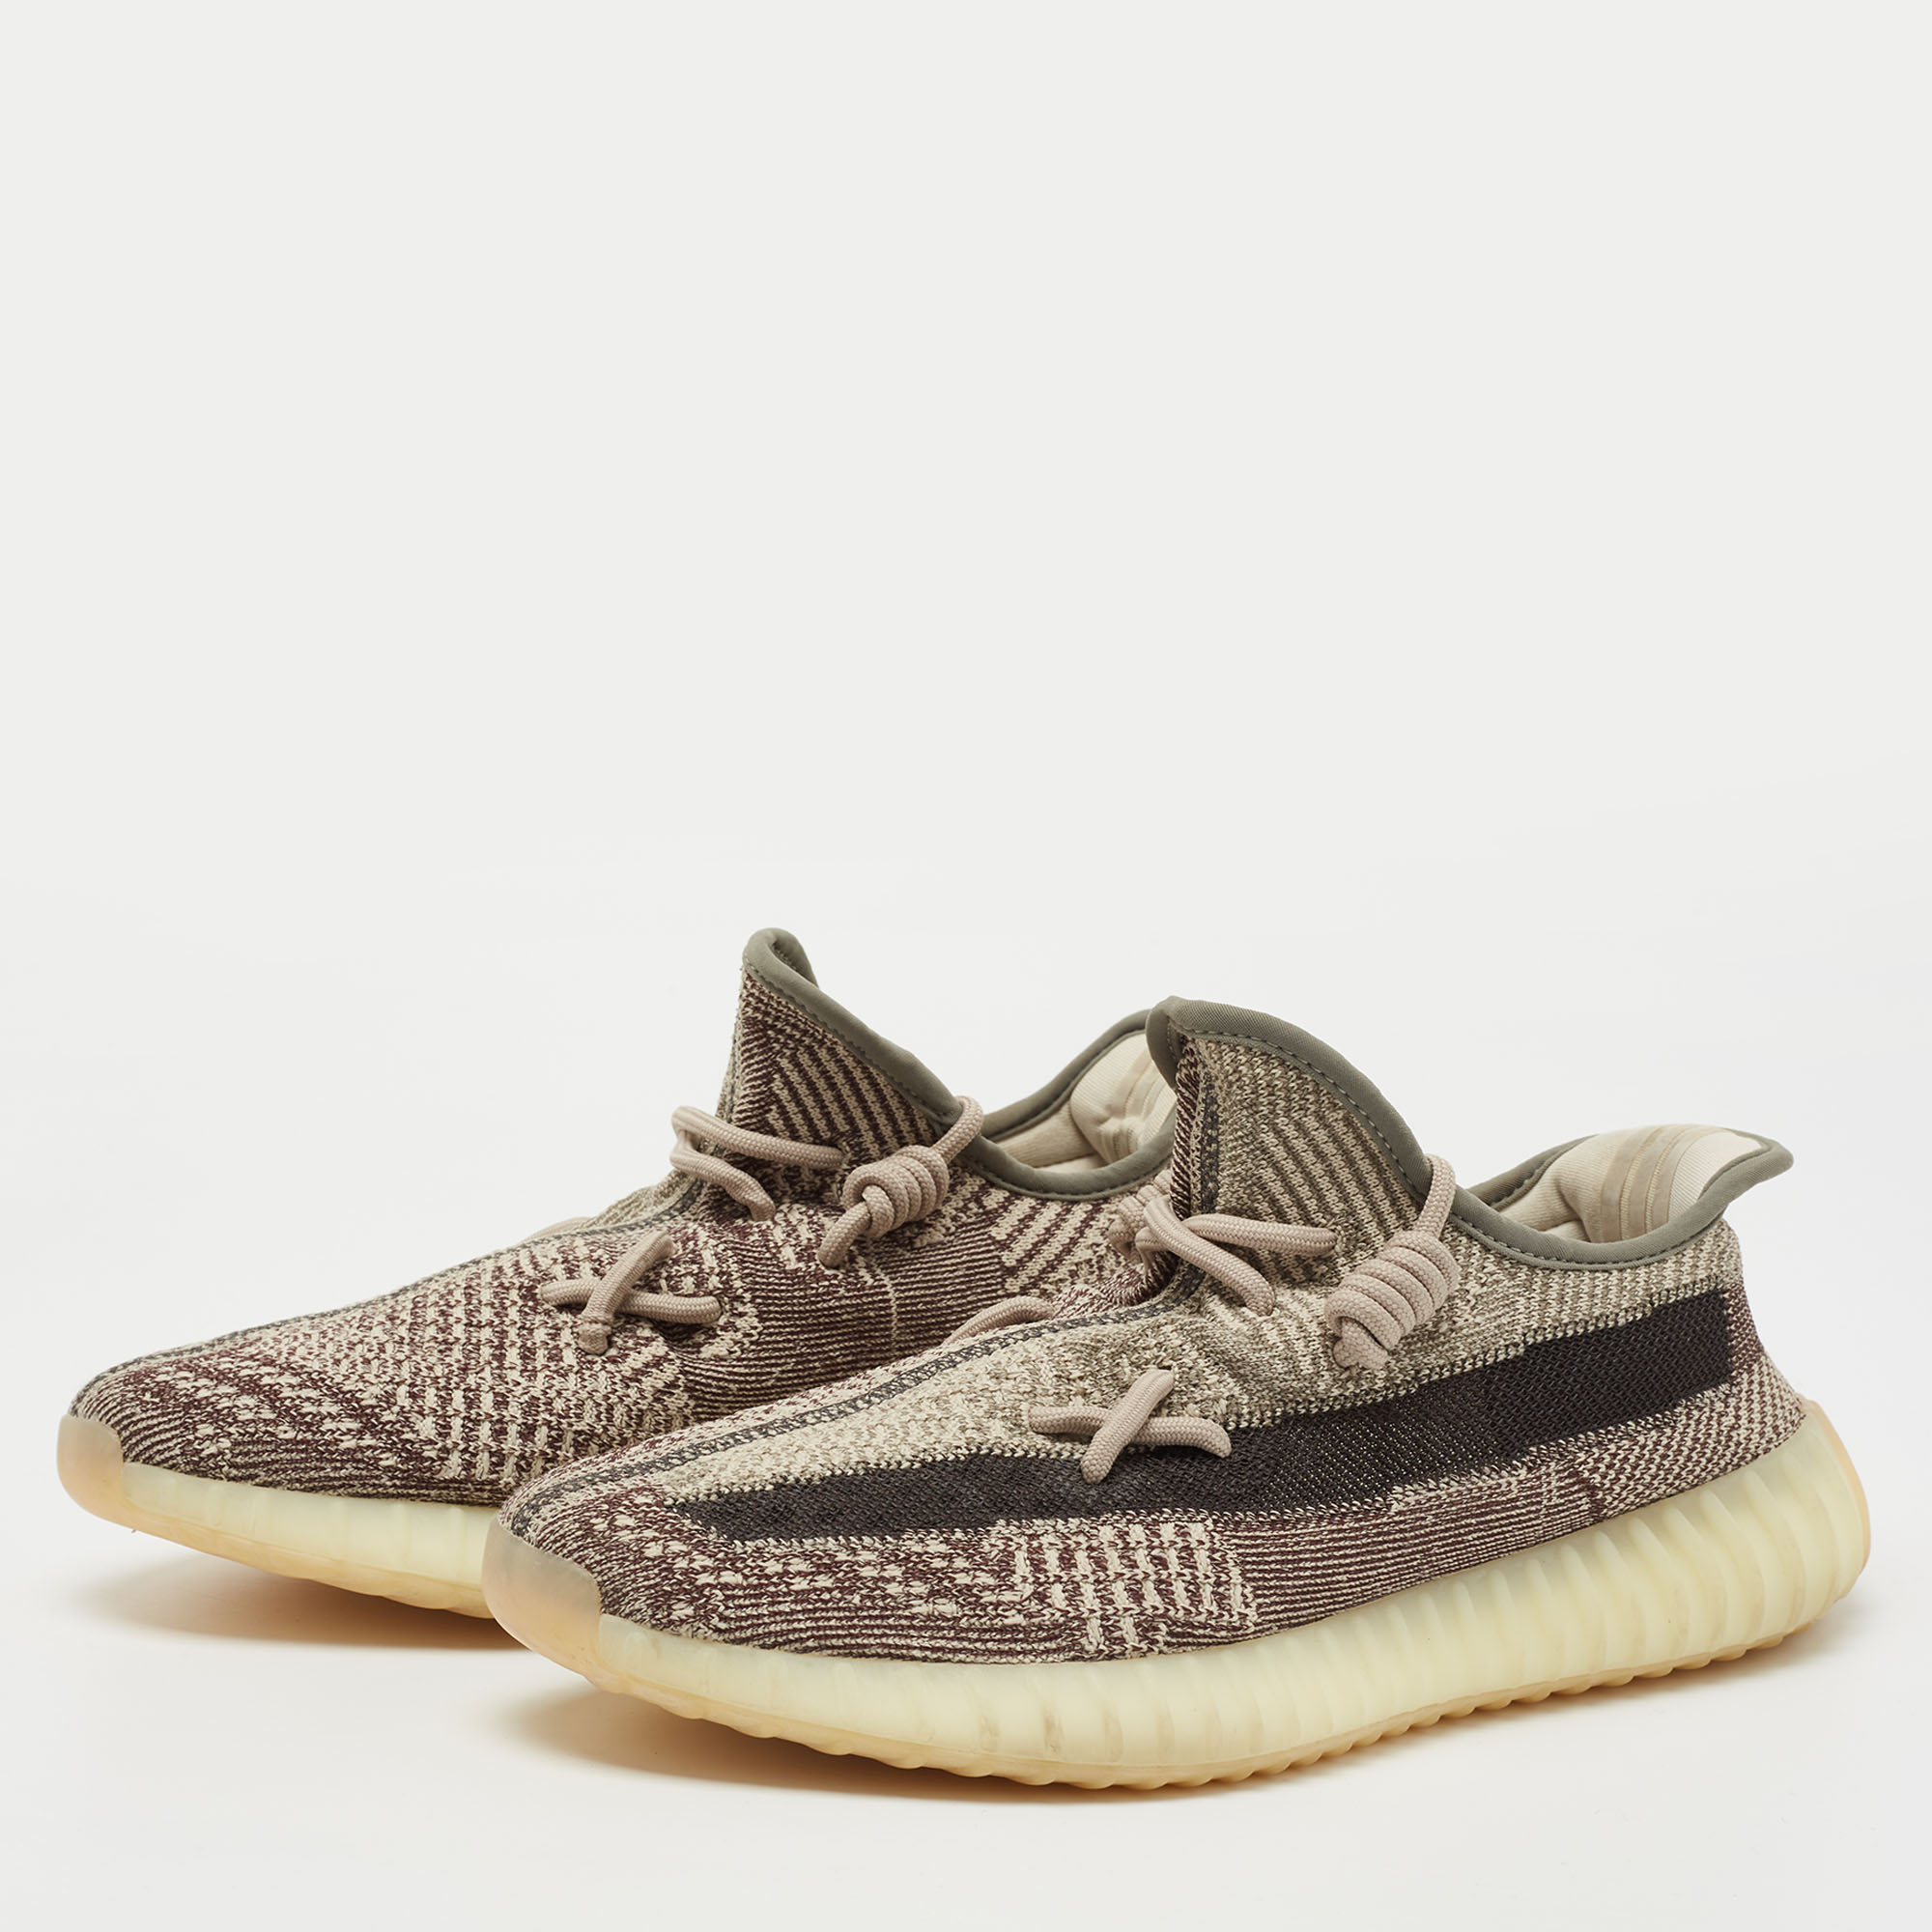 

Yeezy x Adidas Beige/Brown Knit Fabric Boost 350 V2 Zyon Sneakers Size 42 2/3